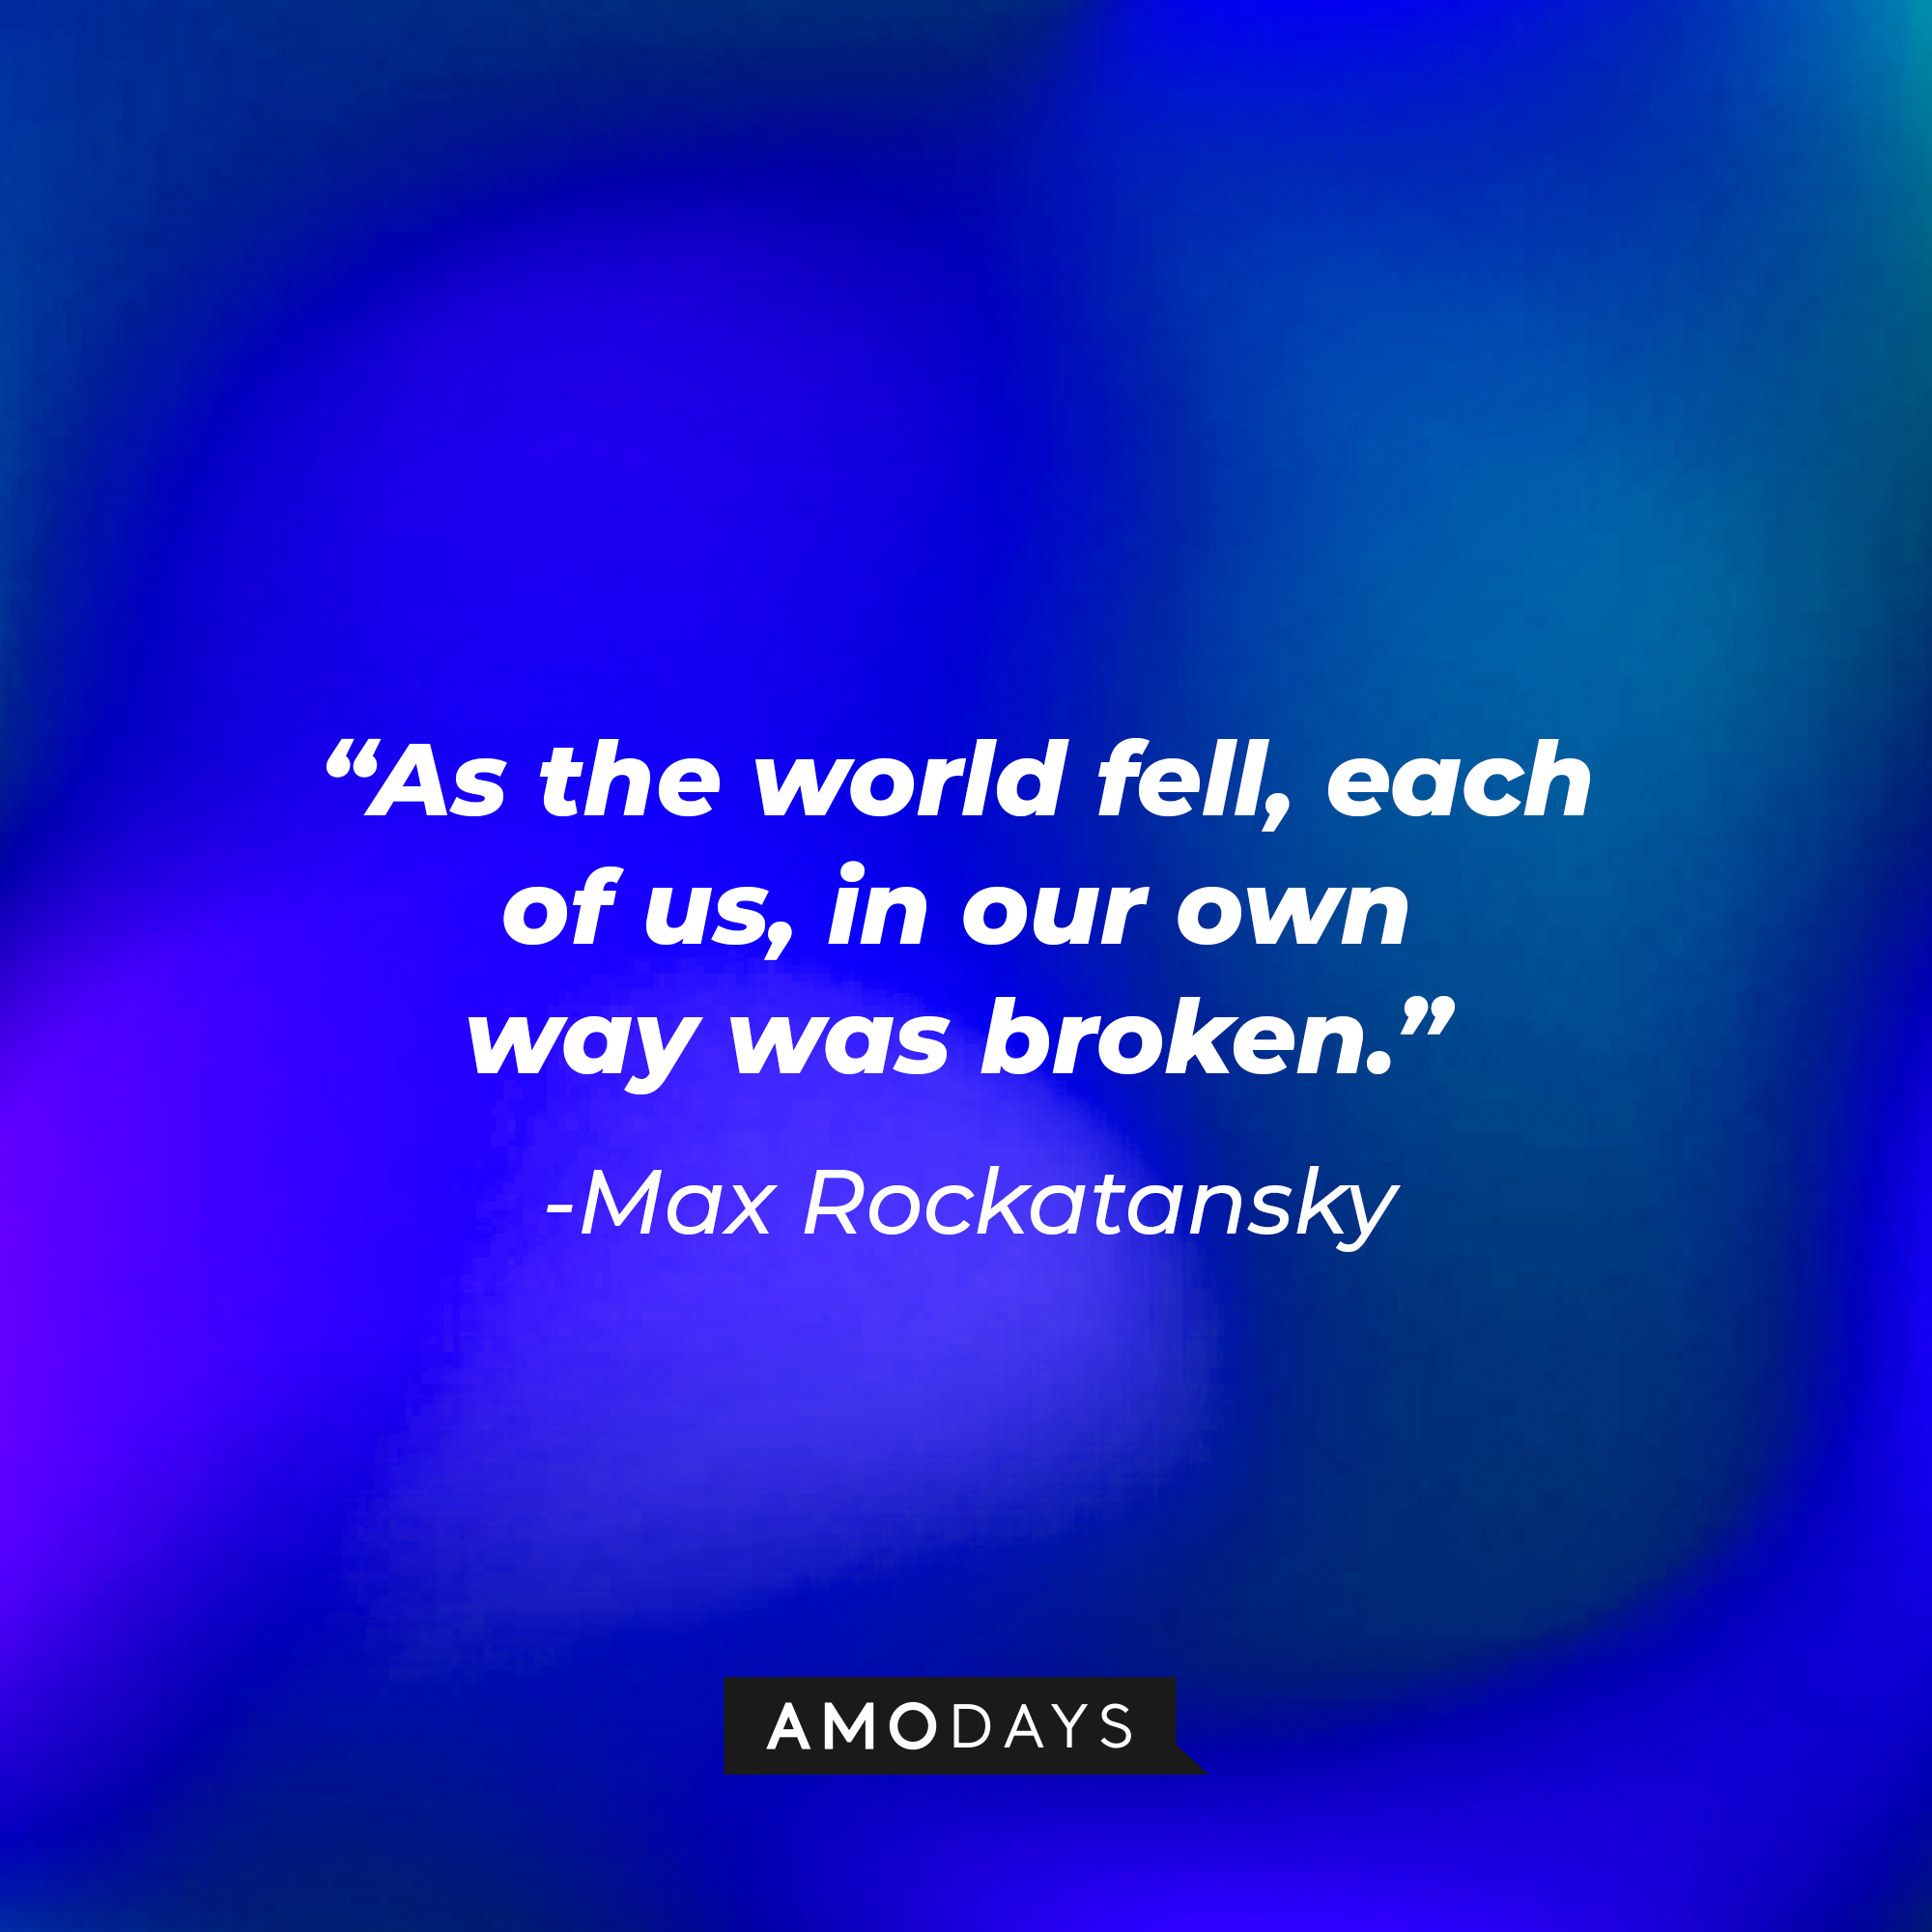 Max Rockatansky’s quote: “As the world fell, each of us in our own way was broken.” | Source: AmoDays